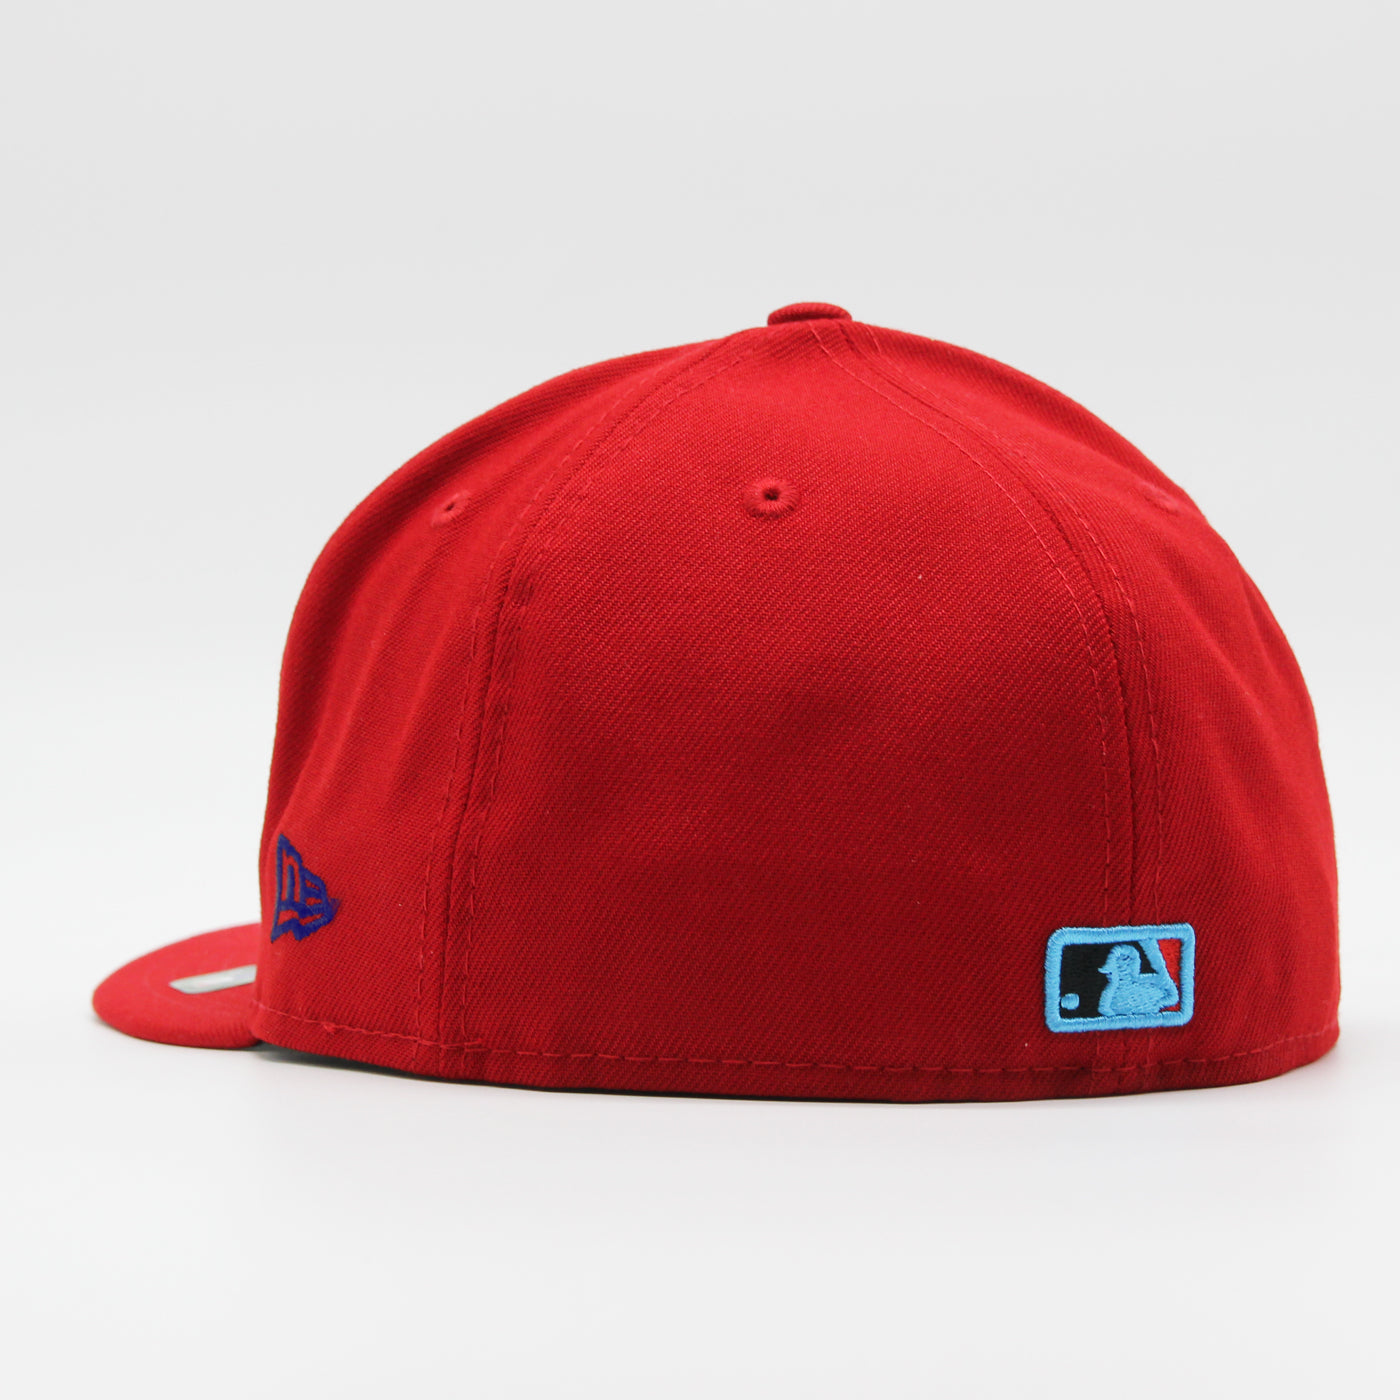 New Era Father's Day 2023 59Fifty P Phillies red/blue